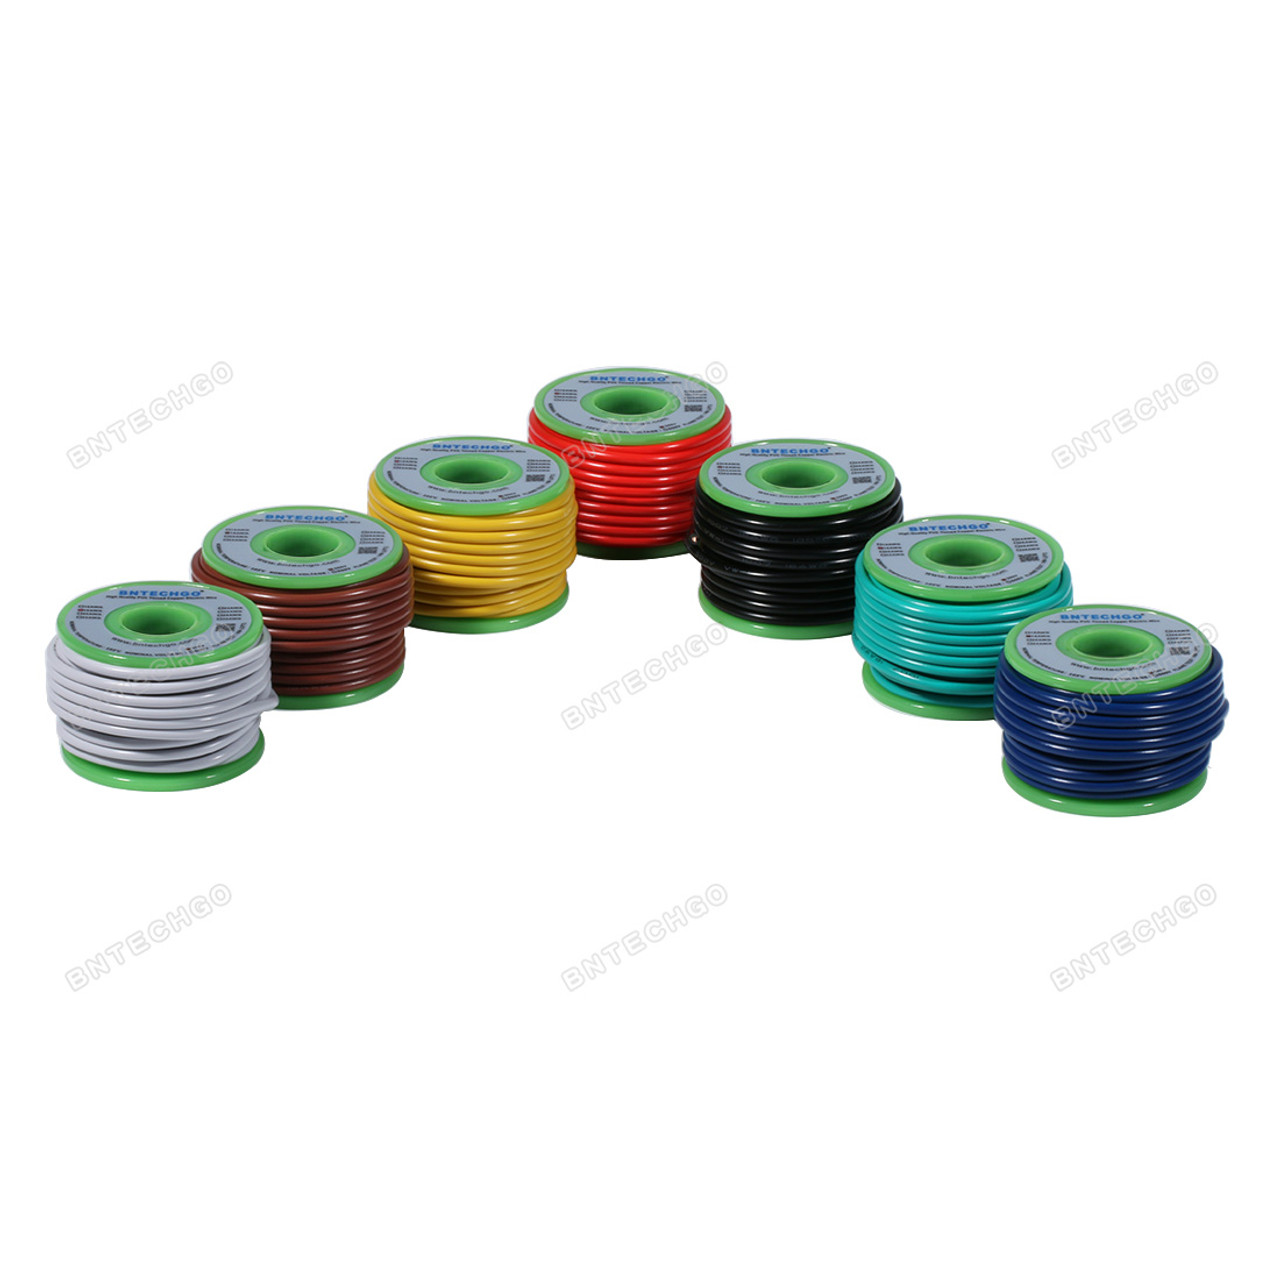 BNTECHGO 18 Gauge PVC 1007 Solid Electric Wire Kit 7 Color Each 20 ft 18  AWG 1007 Hook Up Tinned Copper Wire